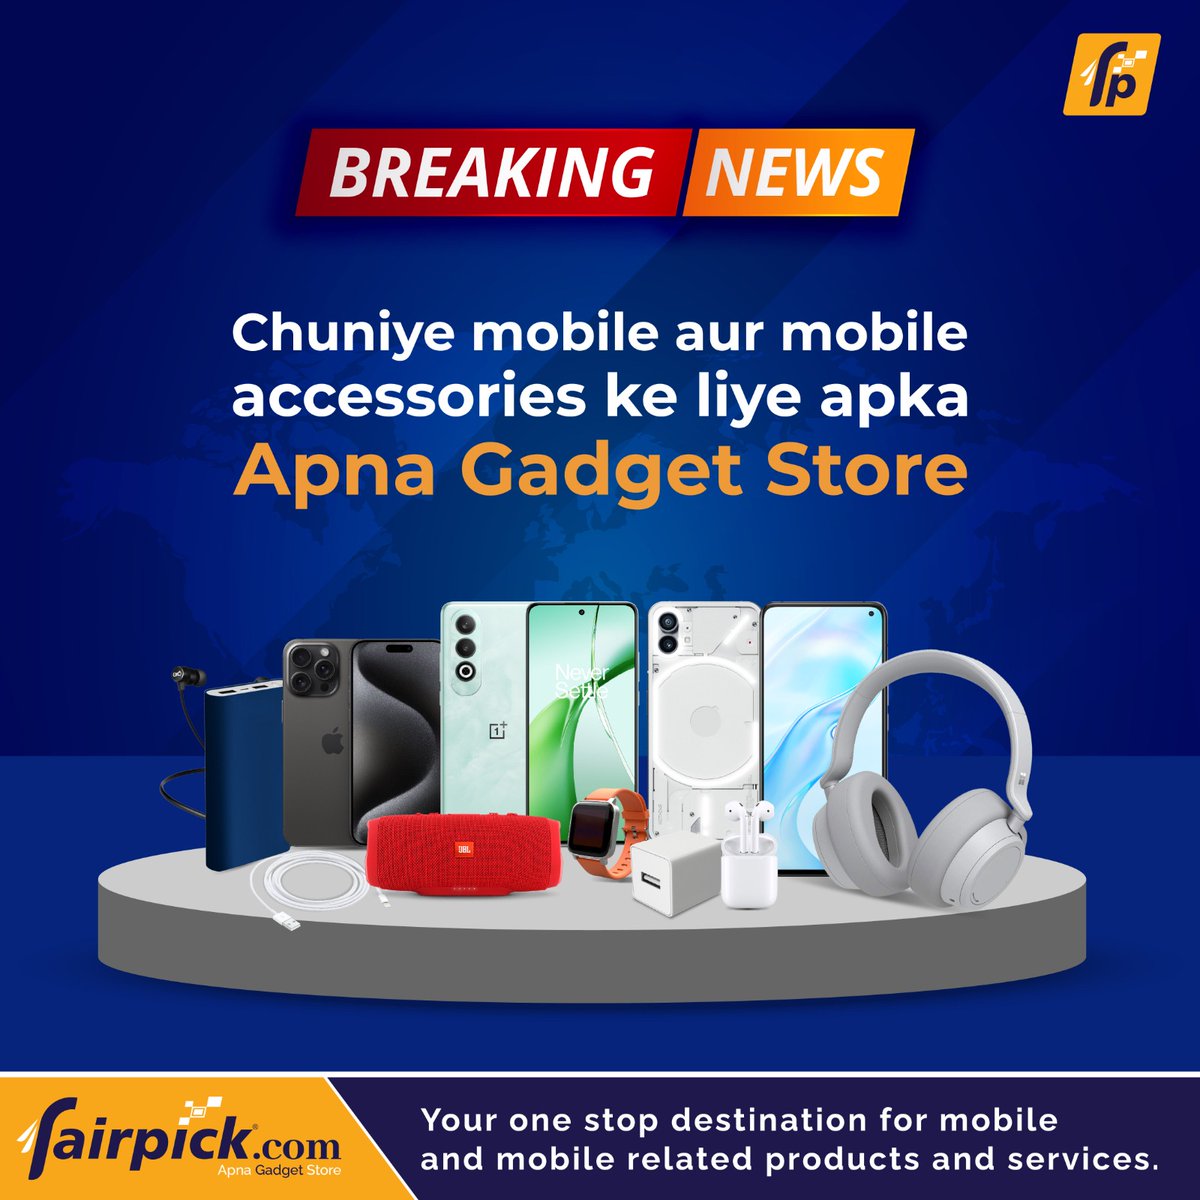 End your hunt for mobile phones and mobile accessories. 

Visit a Fairpick.com outlet near you today!
.
.
.
.
.
#fairpick #fairpickstore #gadget #gadgetstore #mobile #mobileaccessories #iphone #androidphone